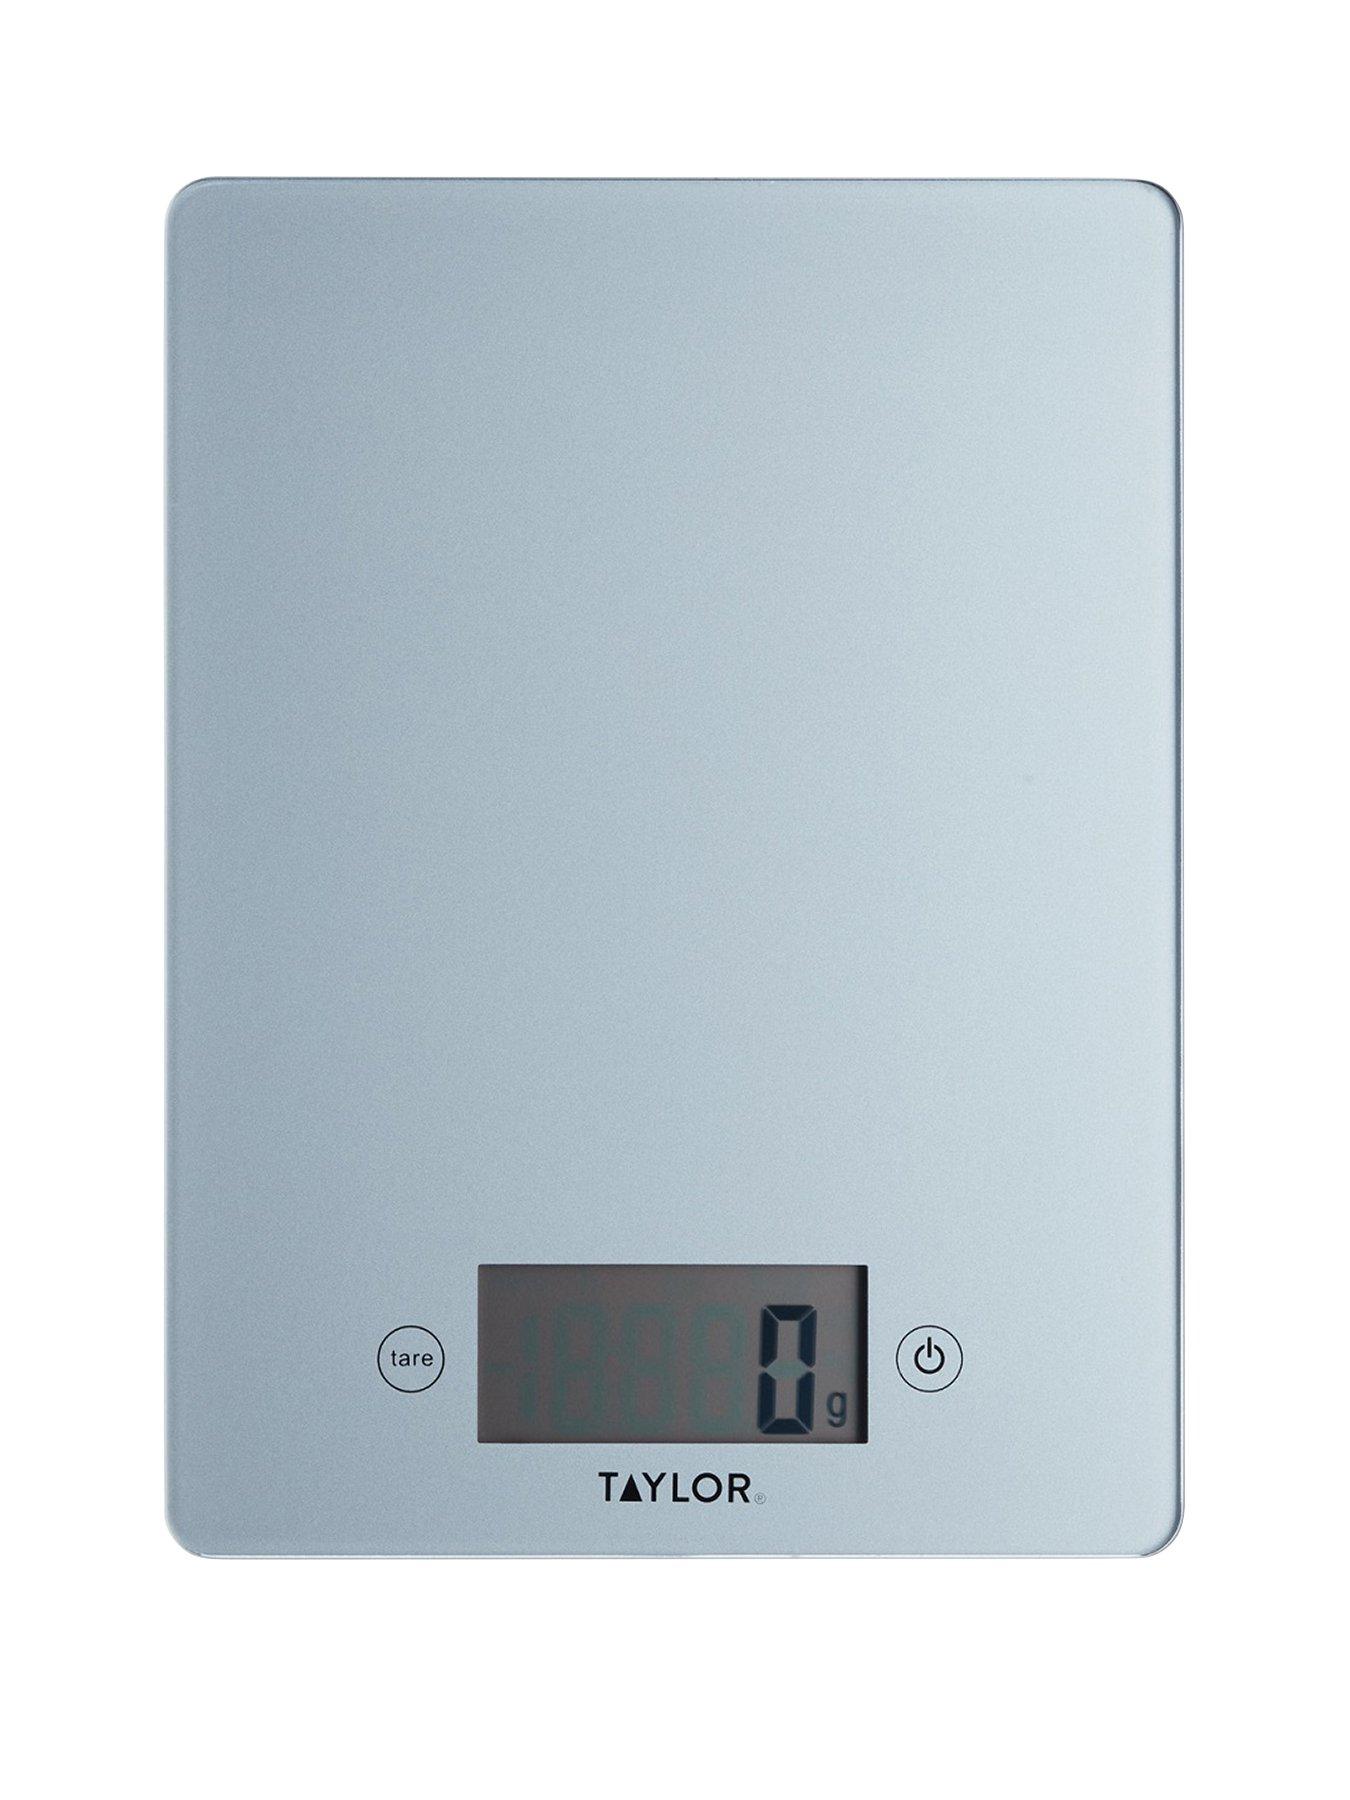 Digital Scale 500g x 0.01g for Precision Weighing & Counting - USB Wall  Adapter NEW, 1 unit - Baker's